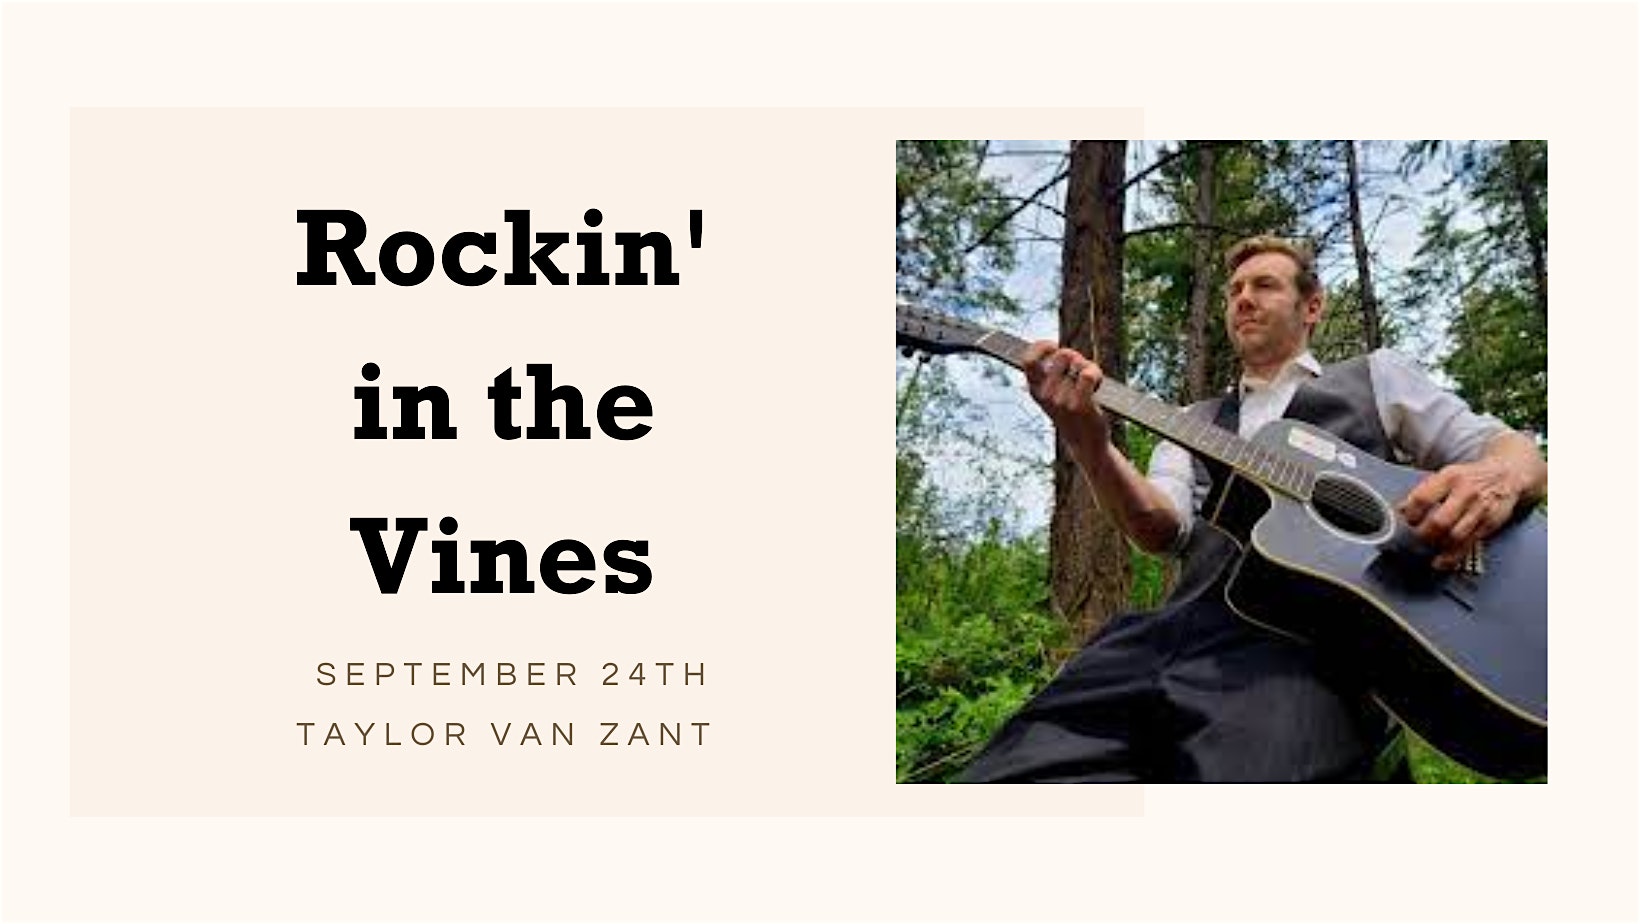 Rockin’ in the Vines with Taylor Van Zant!